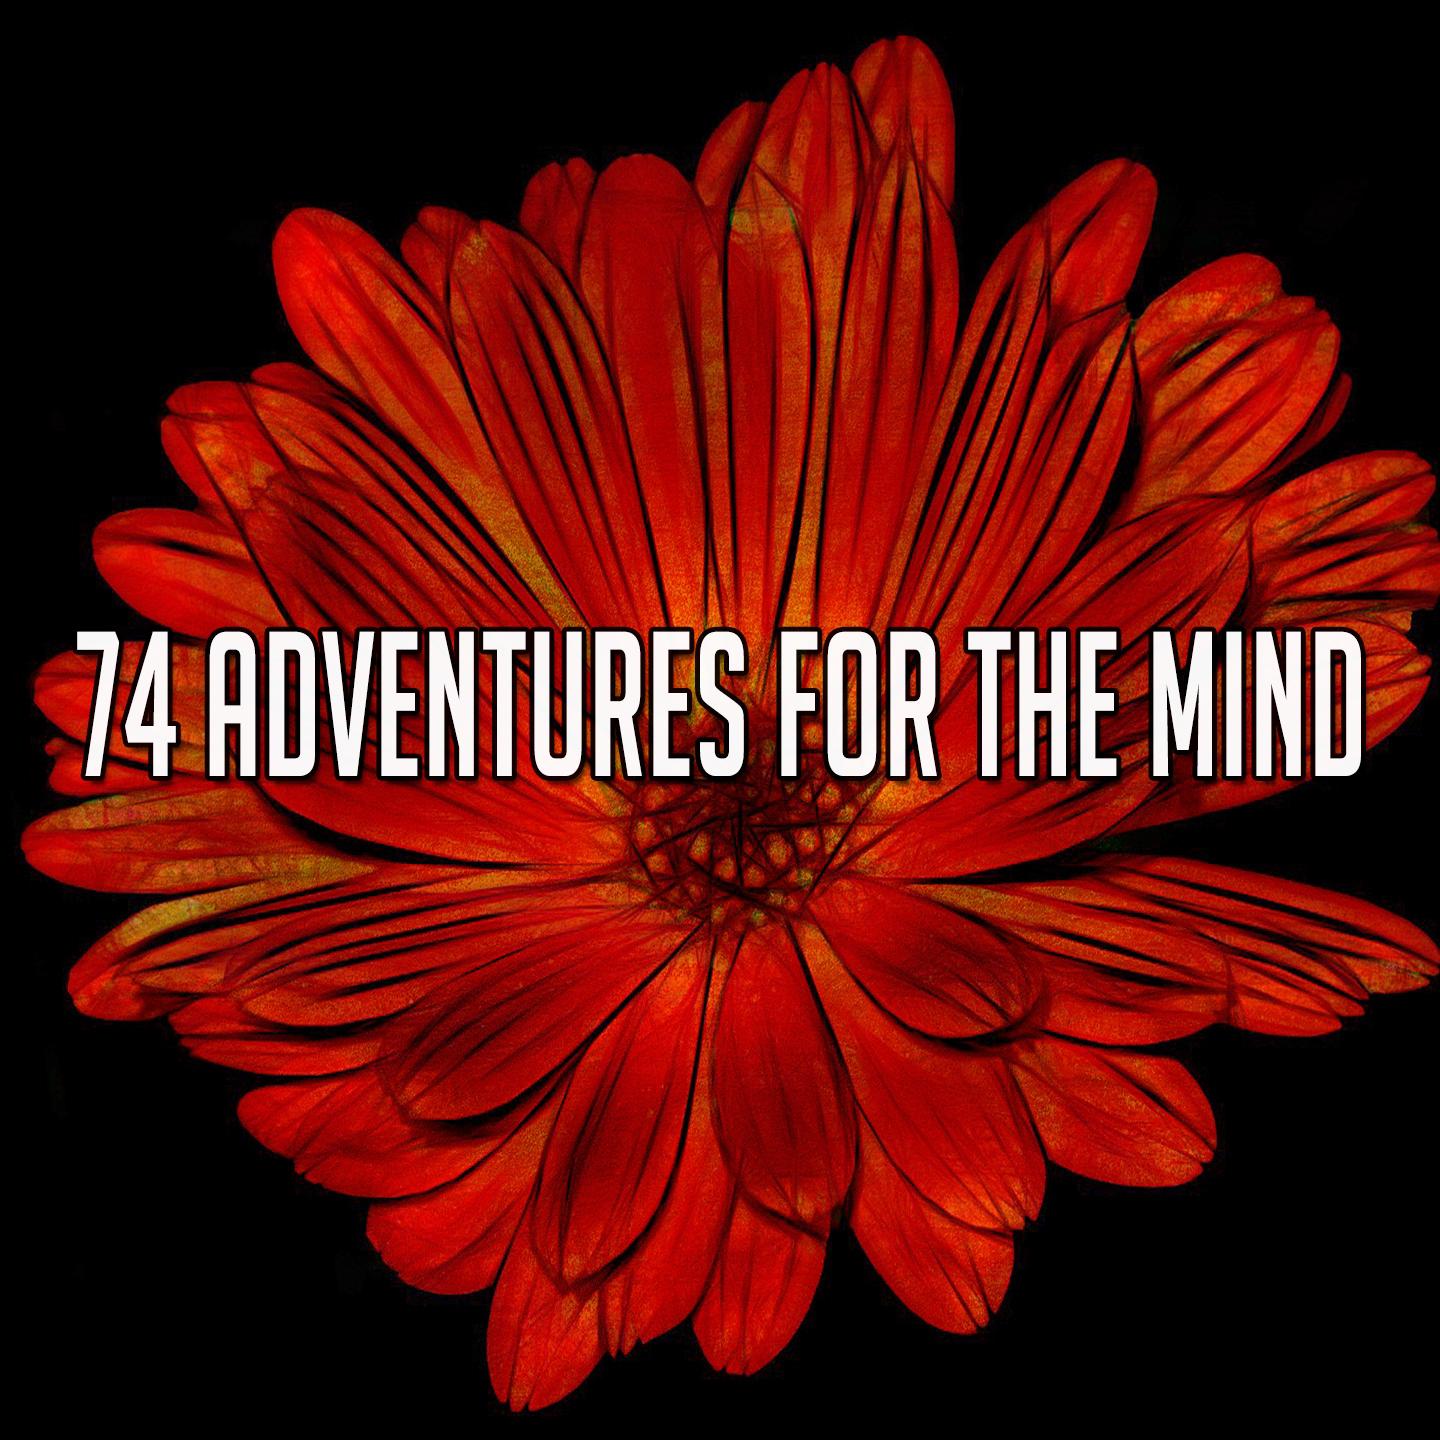 74 Adventures for the Mind